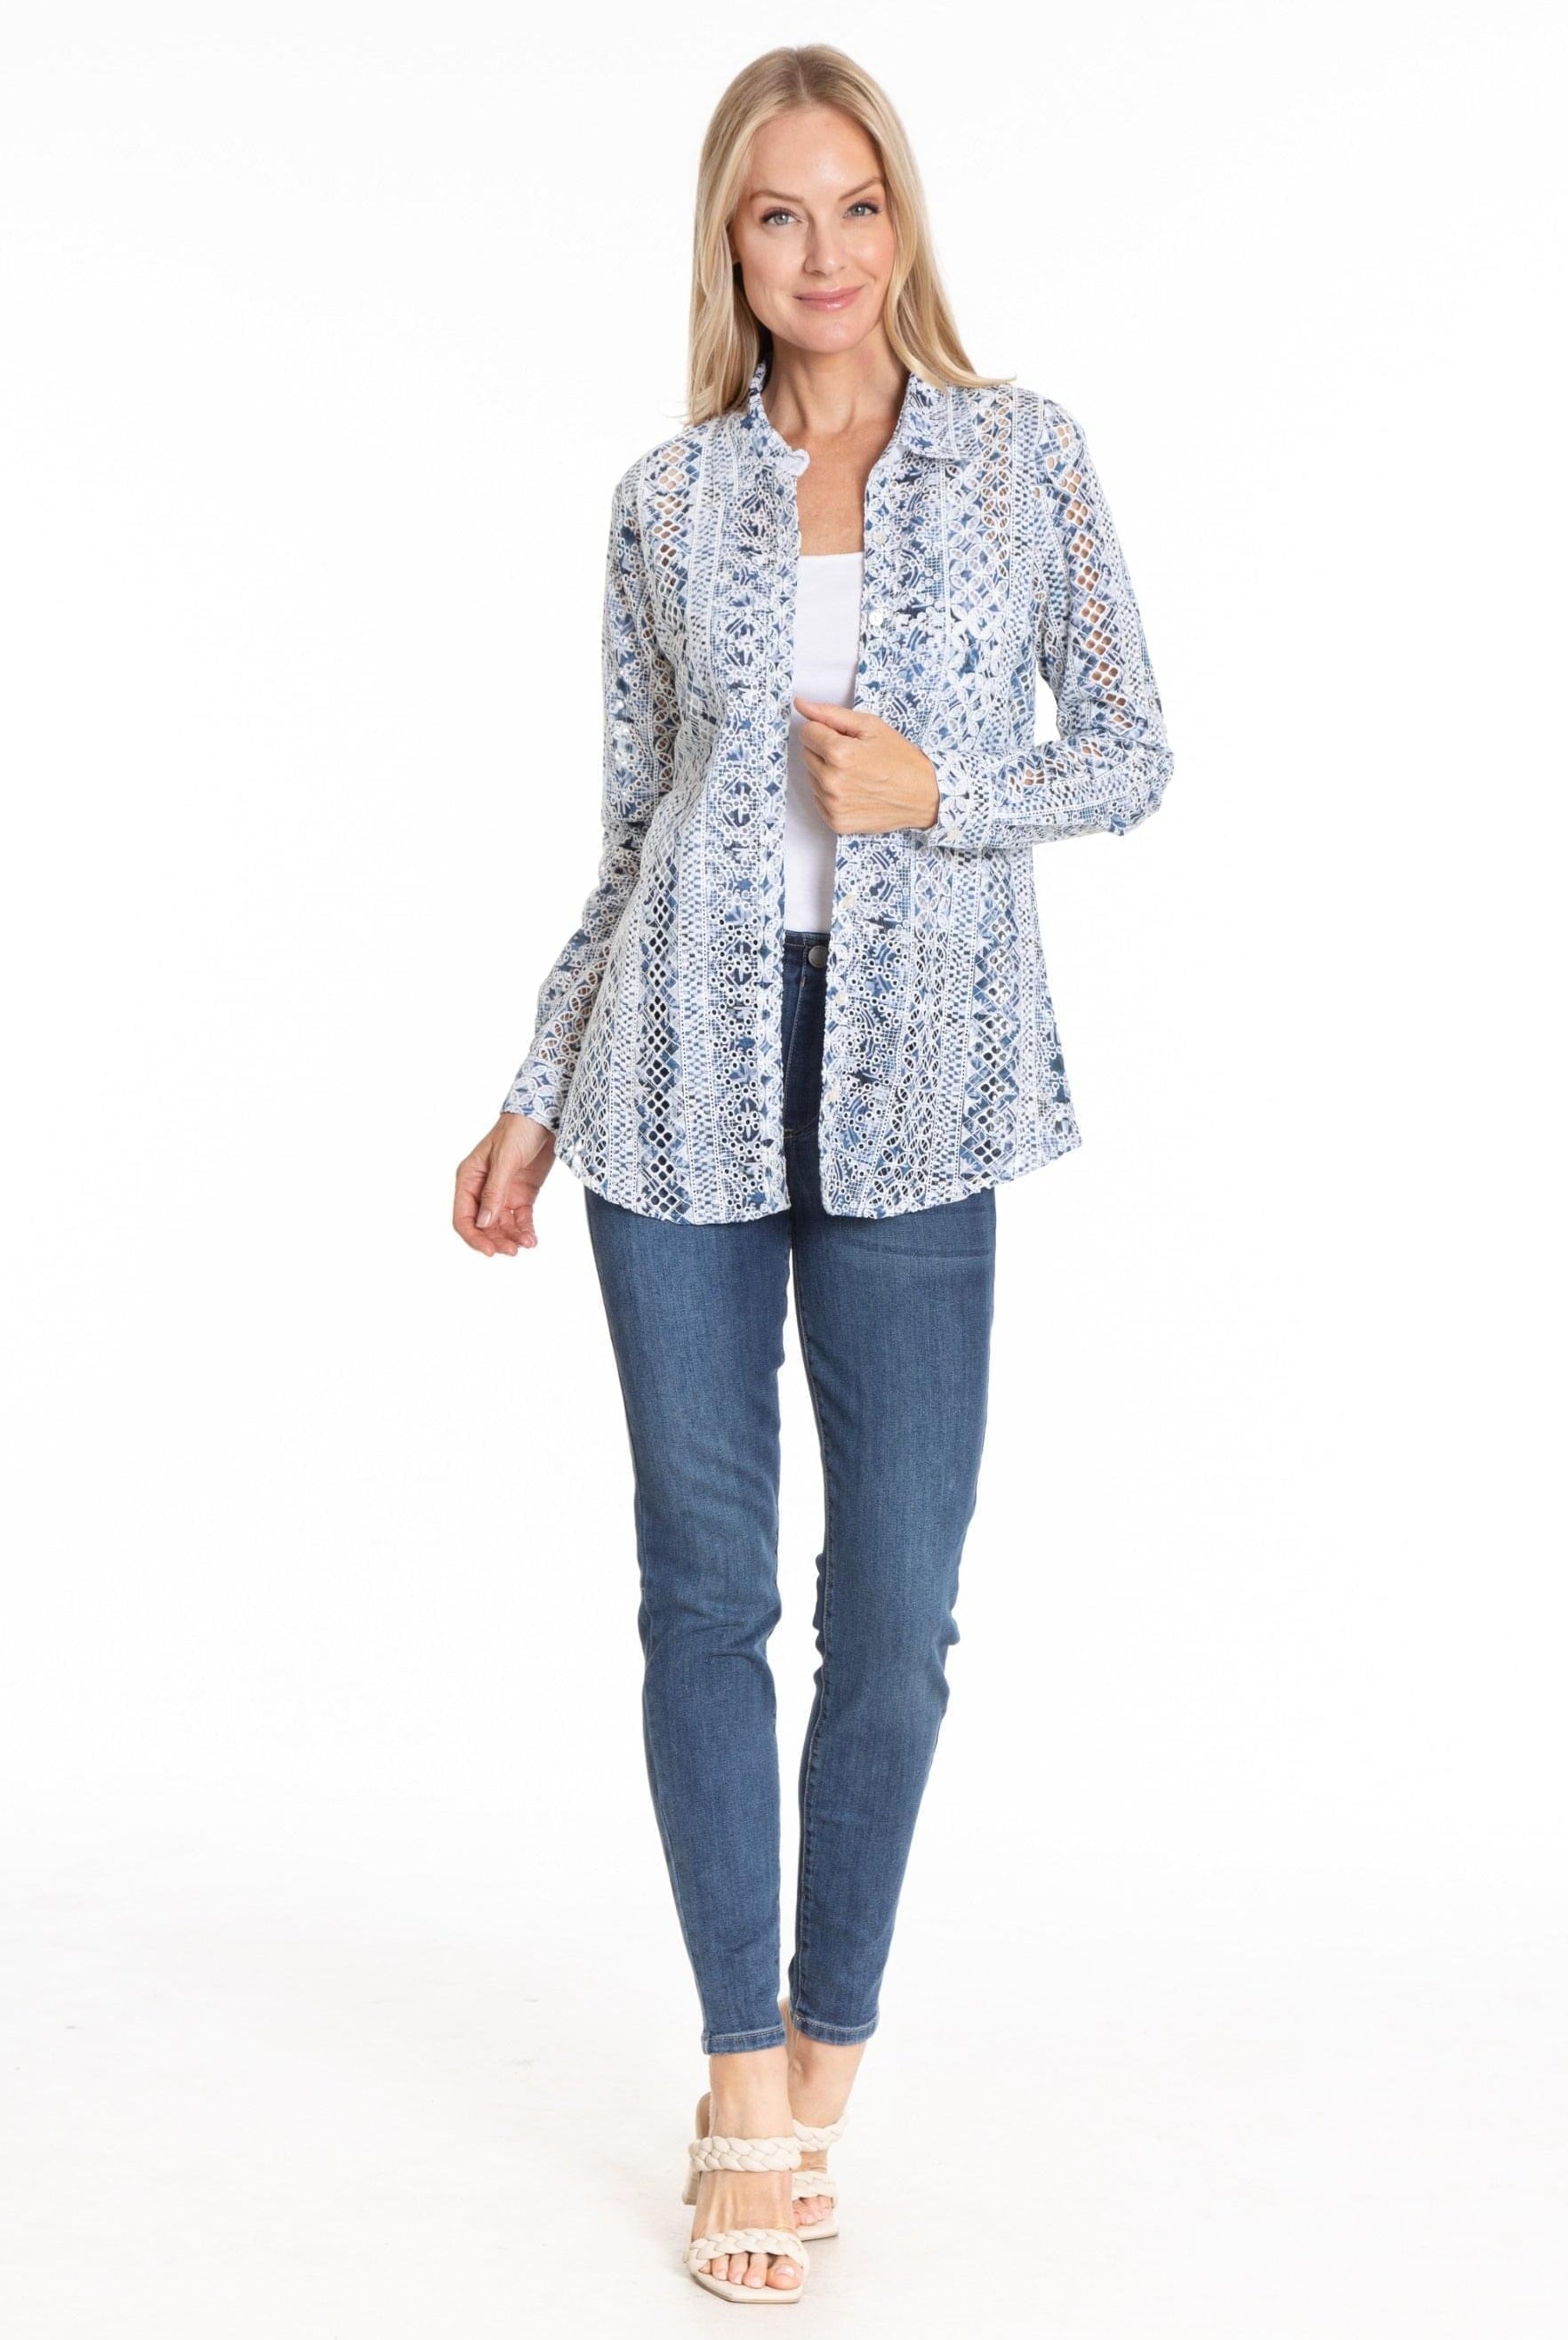 Button-up with Roll-up Sleeve Full top APNY